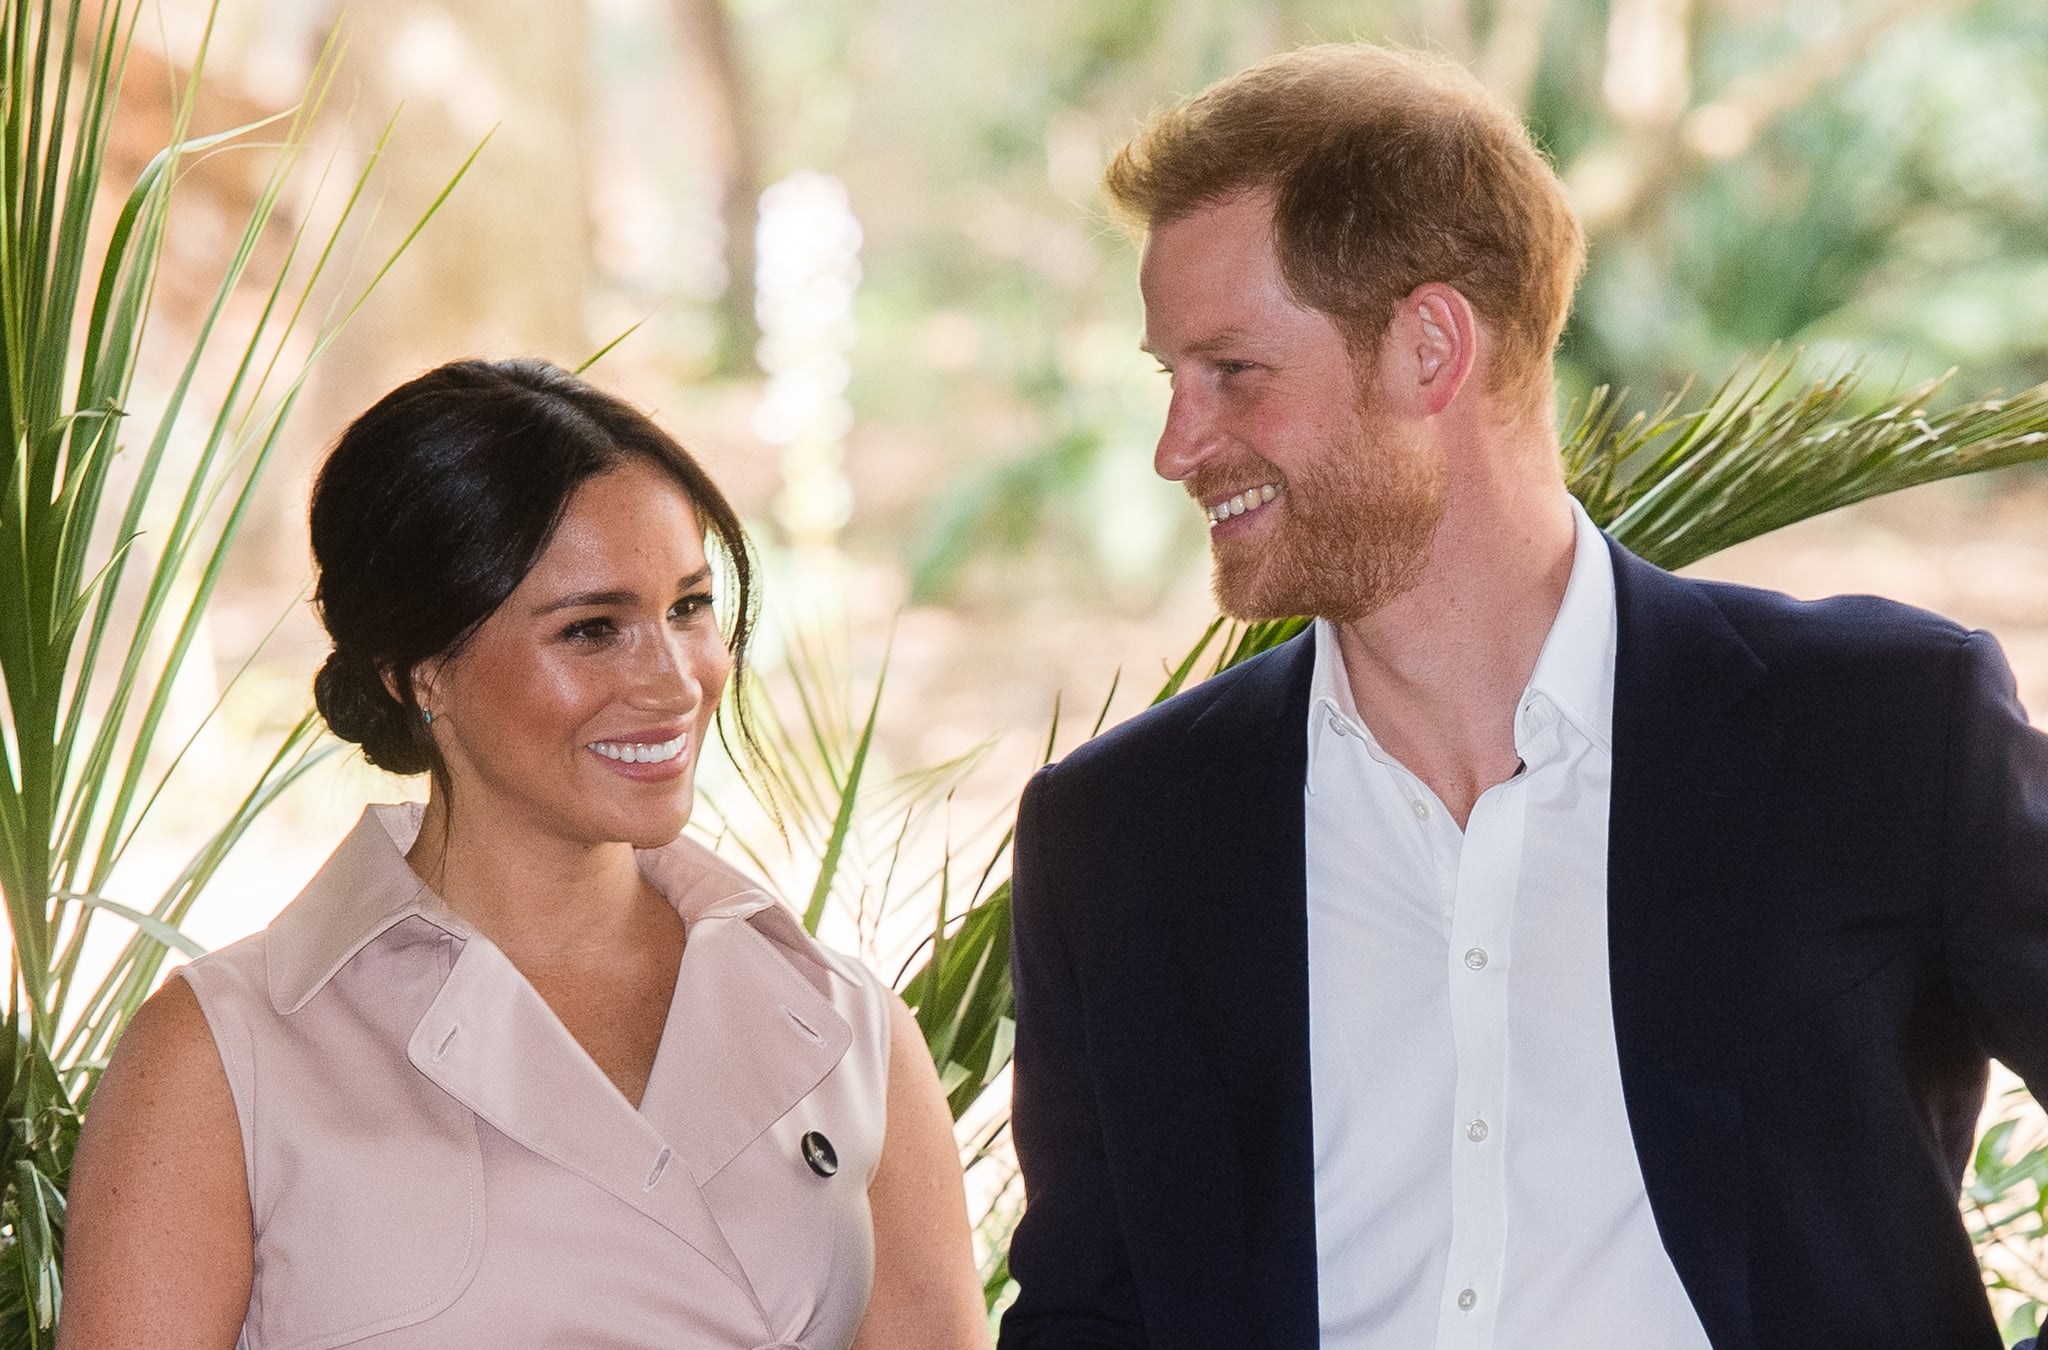 JJOHANNESBURG, SOUTH AFRICA - OCTOBER 02: Prince Harry, Duke of Sussex and Meghan, Duchess of Sussex visit the British High Commissioner's residence to attend an afternoon reception to celebrate the UK and South Africa's important business and investment relationship, looking ahead to the Africa Investment Summit the UK will host in 2020. This is part of the Duke and Duchess of Sussex's royal tour to South Africa. on October 02, 2019 in Johannesburg, South Africa. (Photo by Samir Hussein/WireImage)